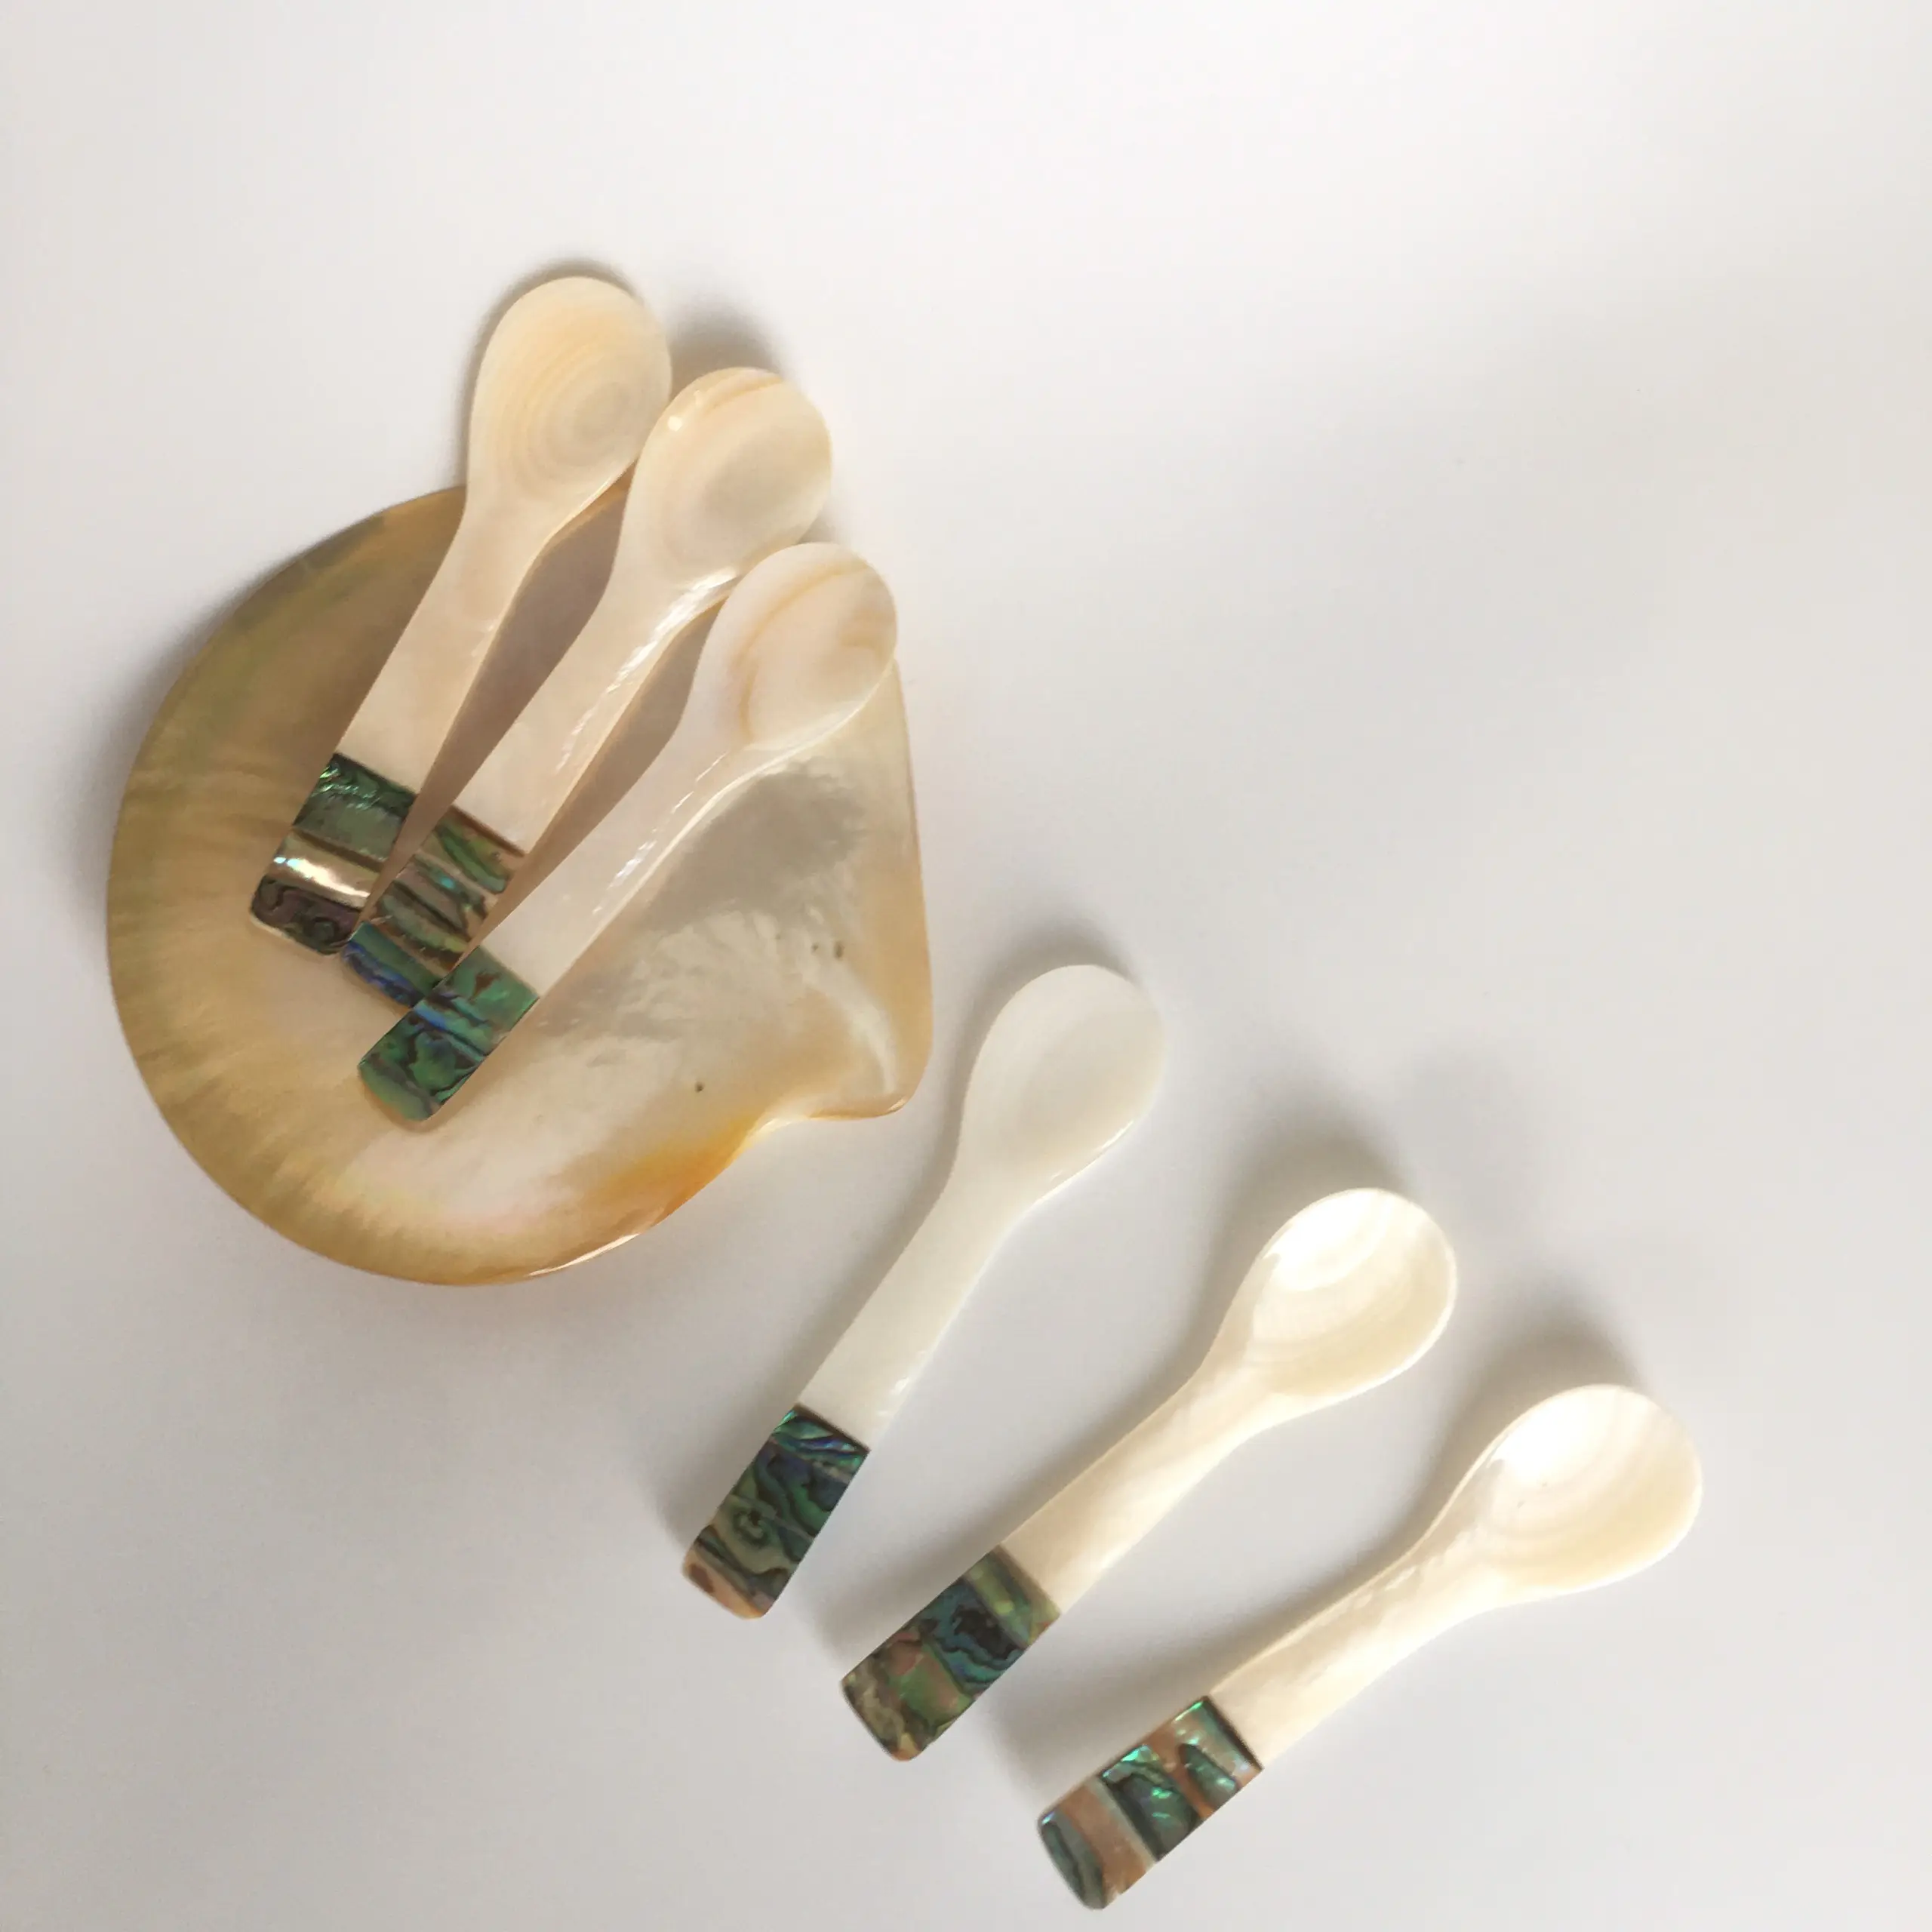 Wholesale 2022 Spoon Set 6 Pcs Caviar Spoon with Abalone Inlay Mother of Pearl 11cm Sustainable Shell Spoon for Restauntant